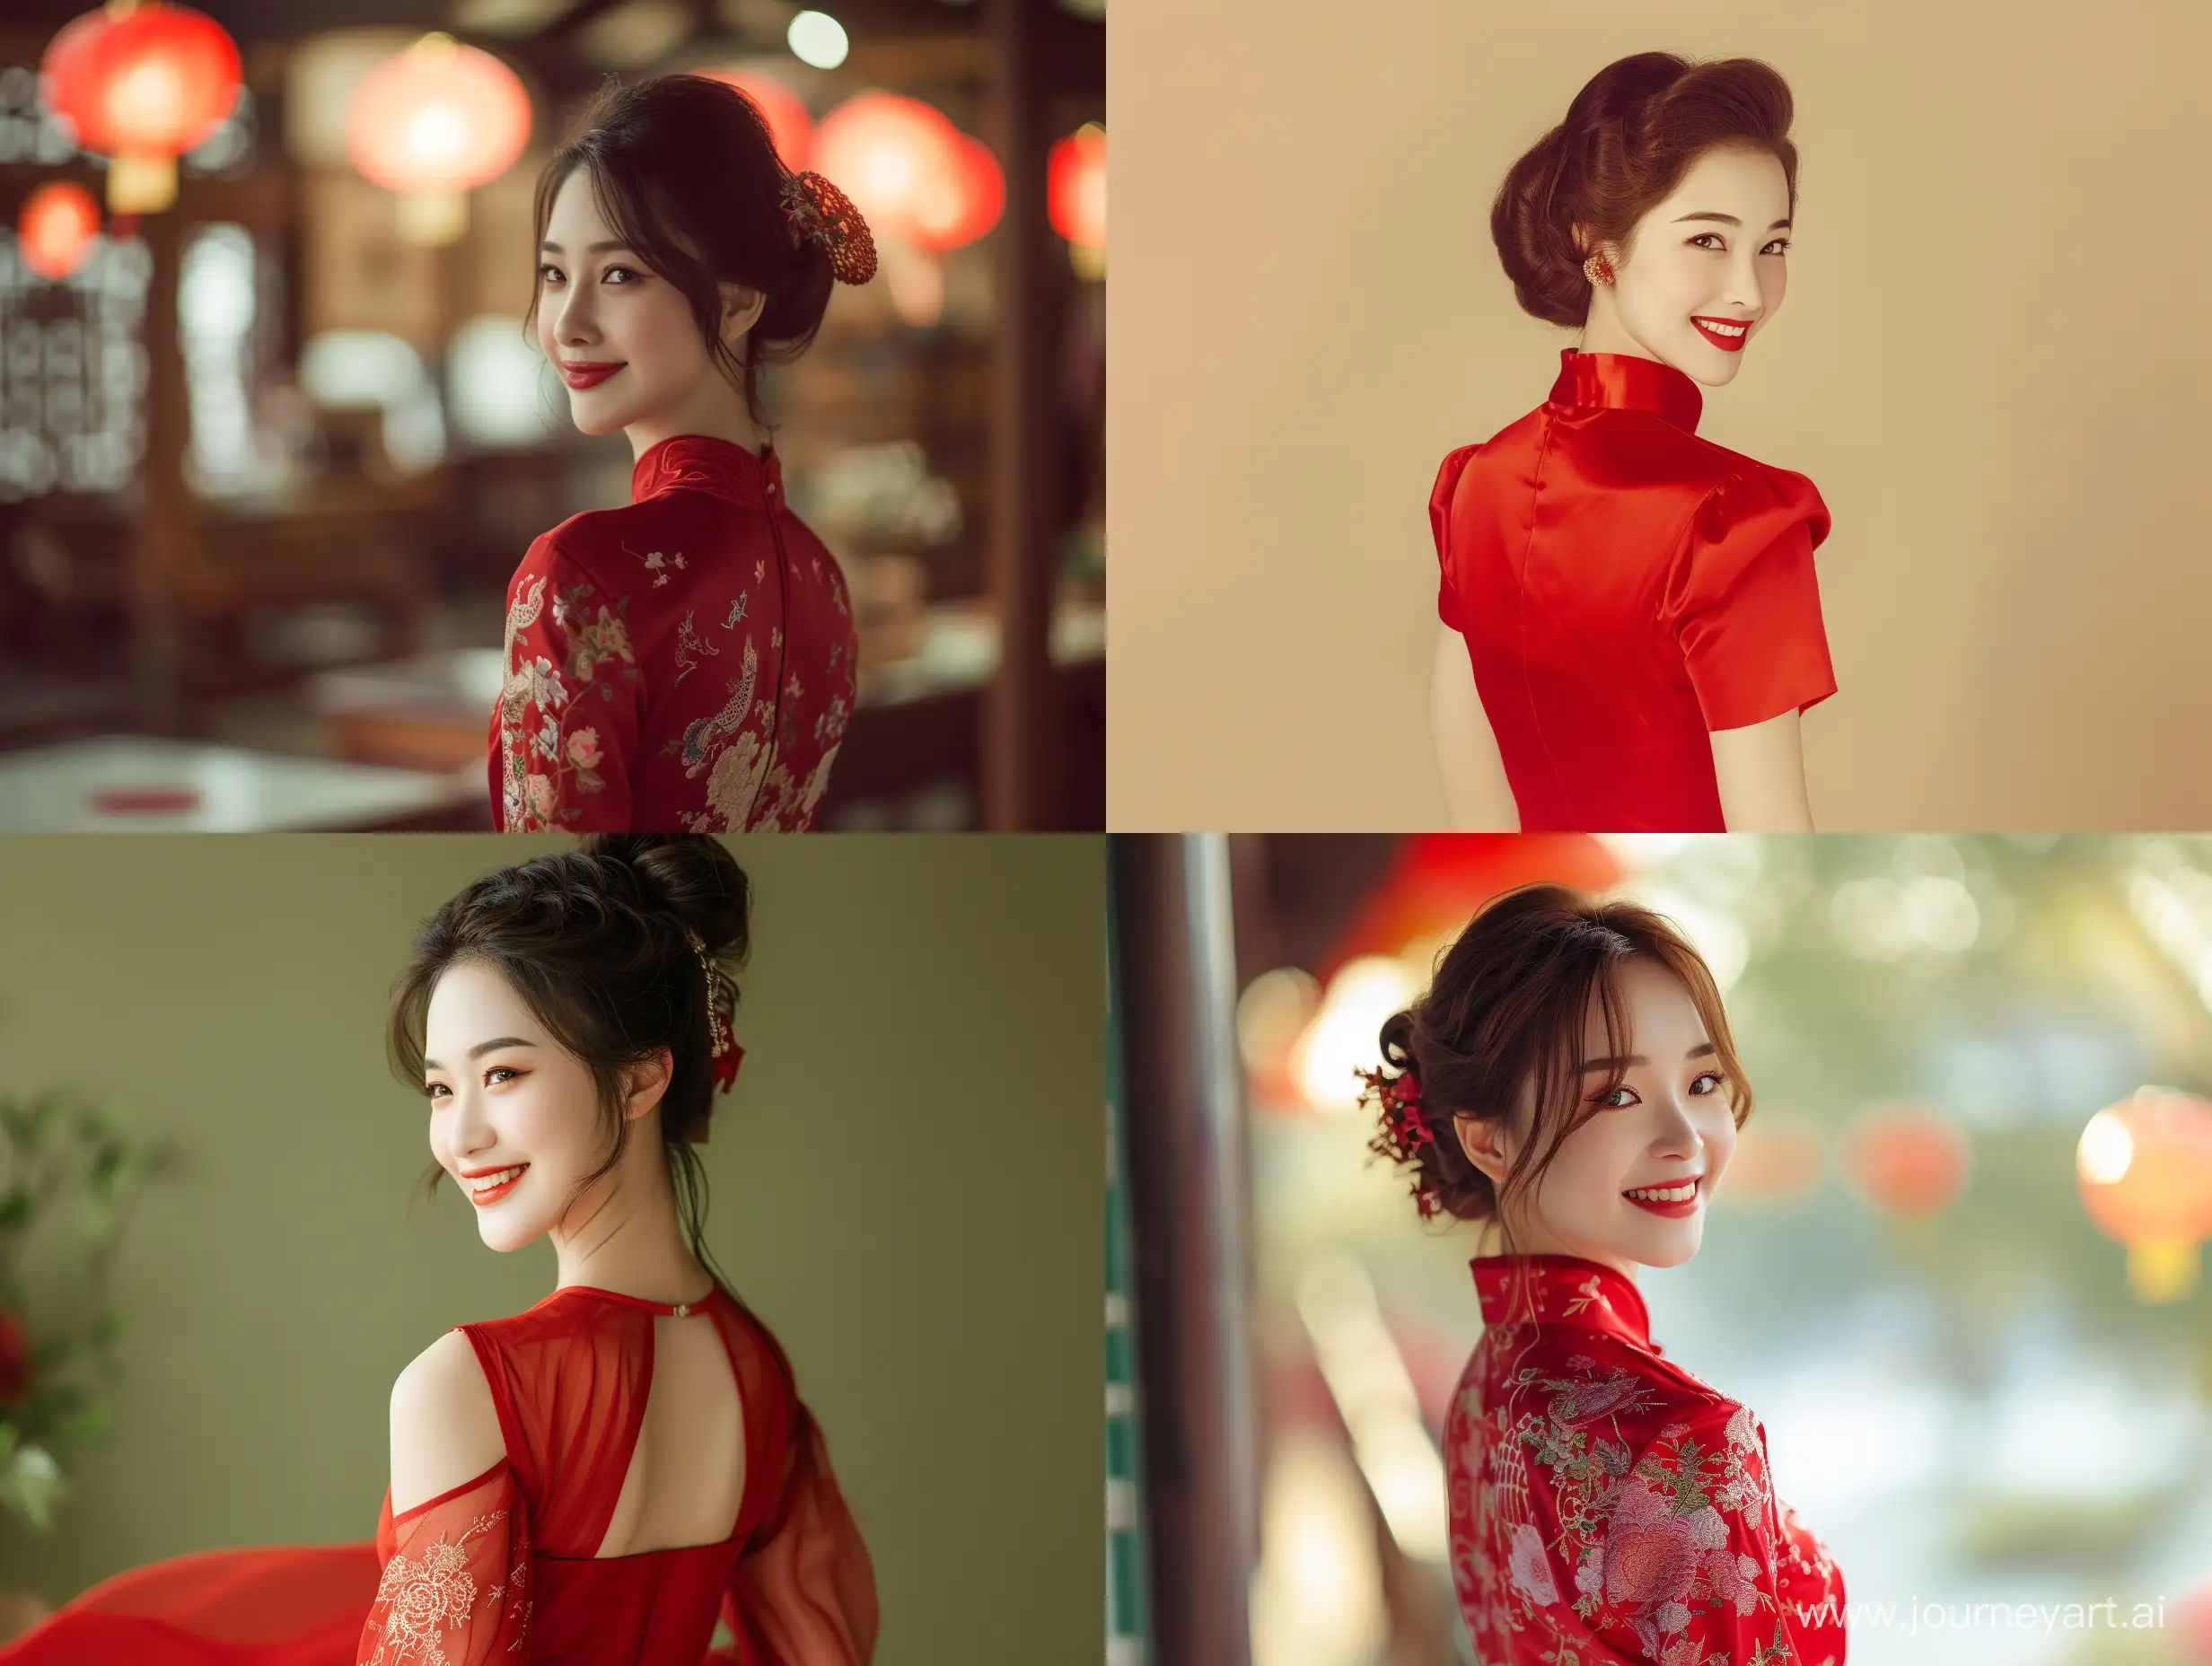 A full-length view of a beauty girl in a red QiPao casting a smiling glance over her shoulder.